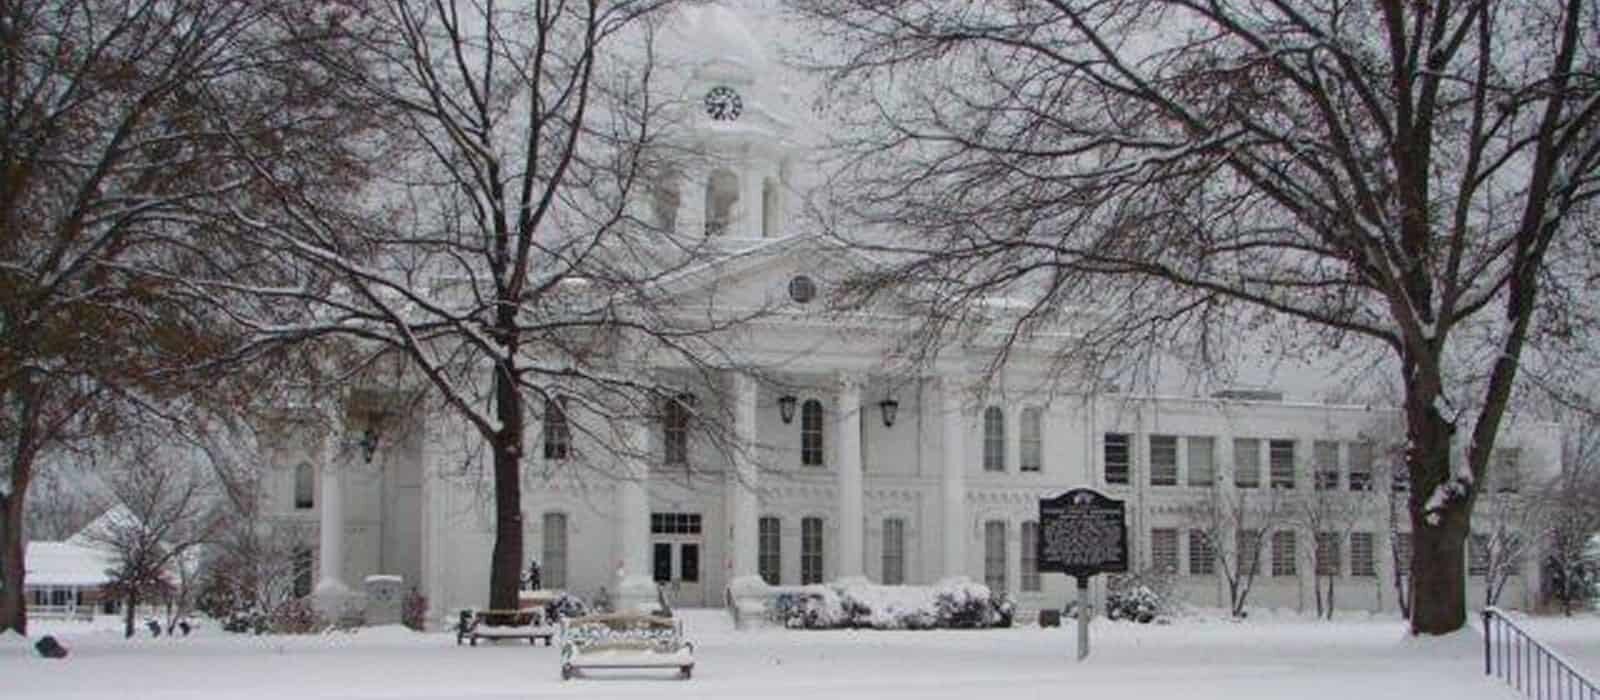 Colbert County Courthouse during winter snow.